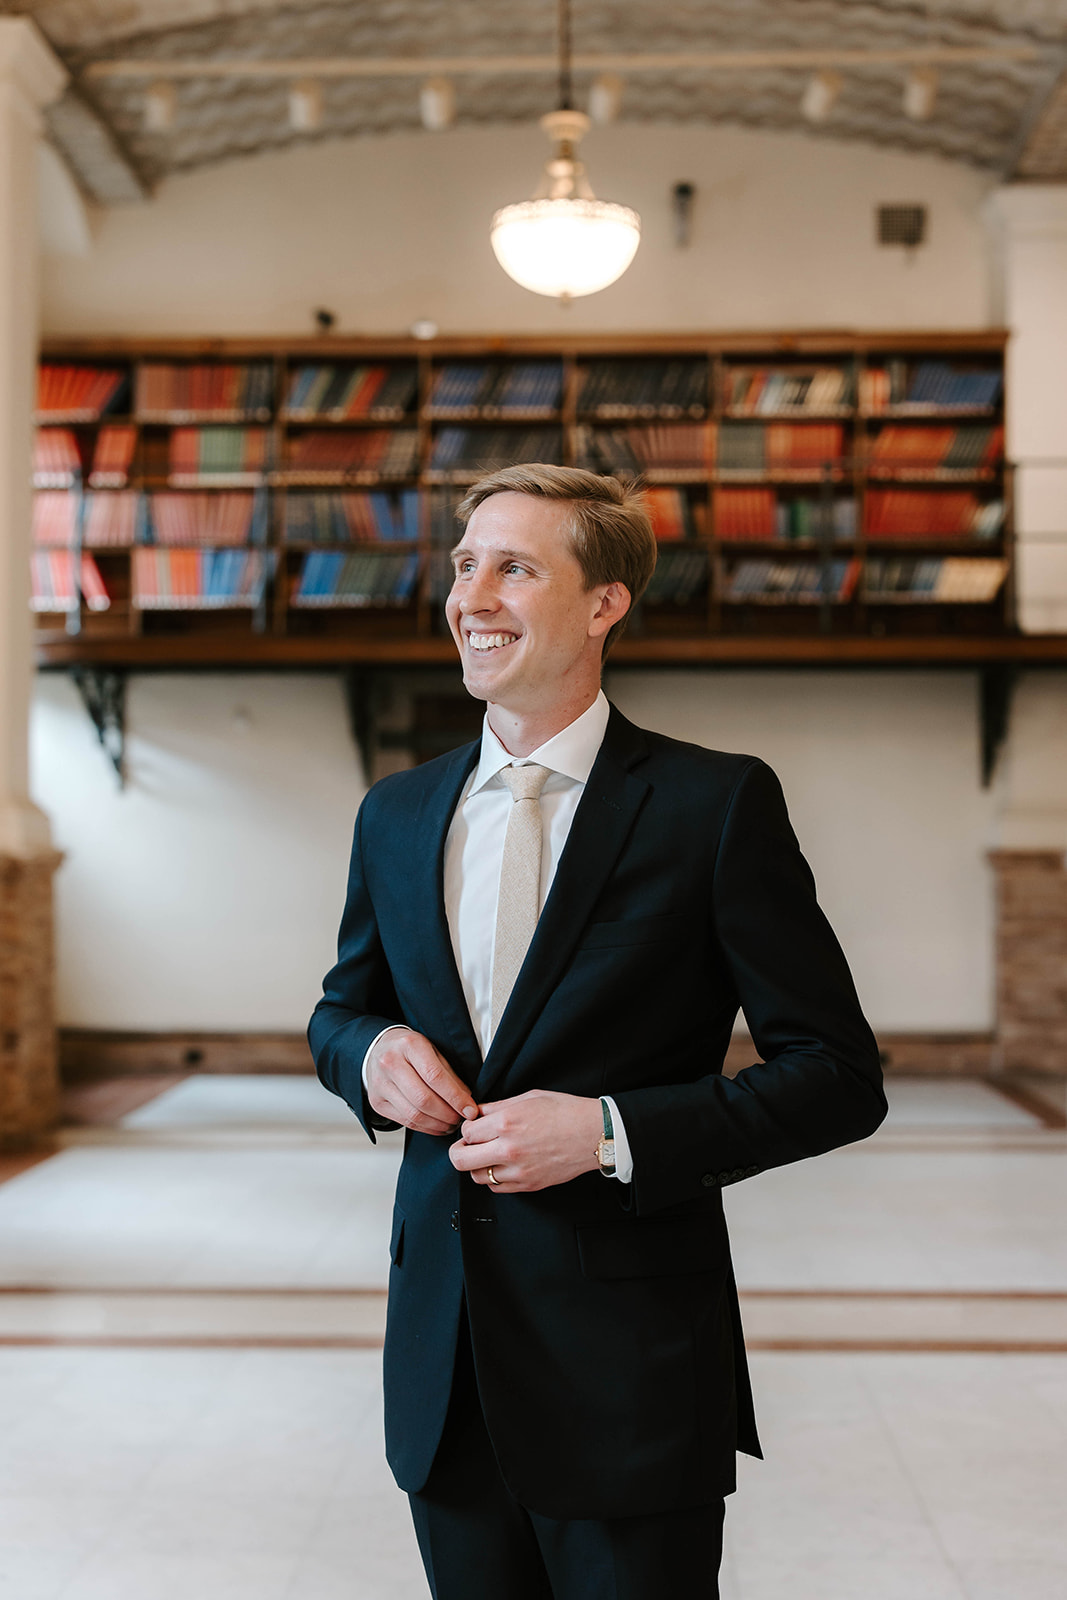 Handsome groom poses in the Boston public library on her wedding day!